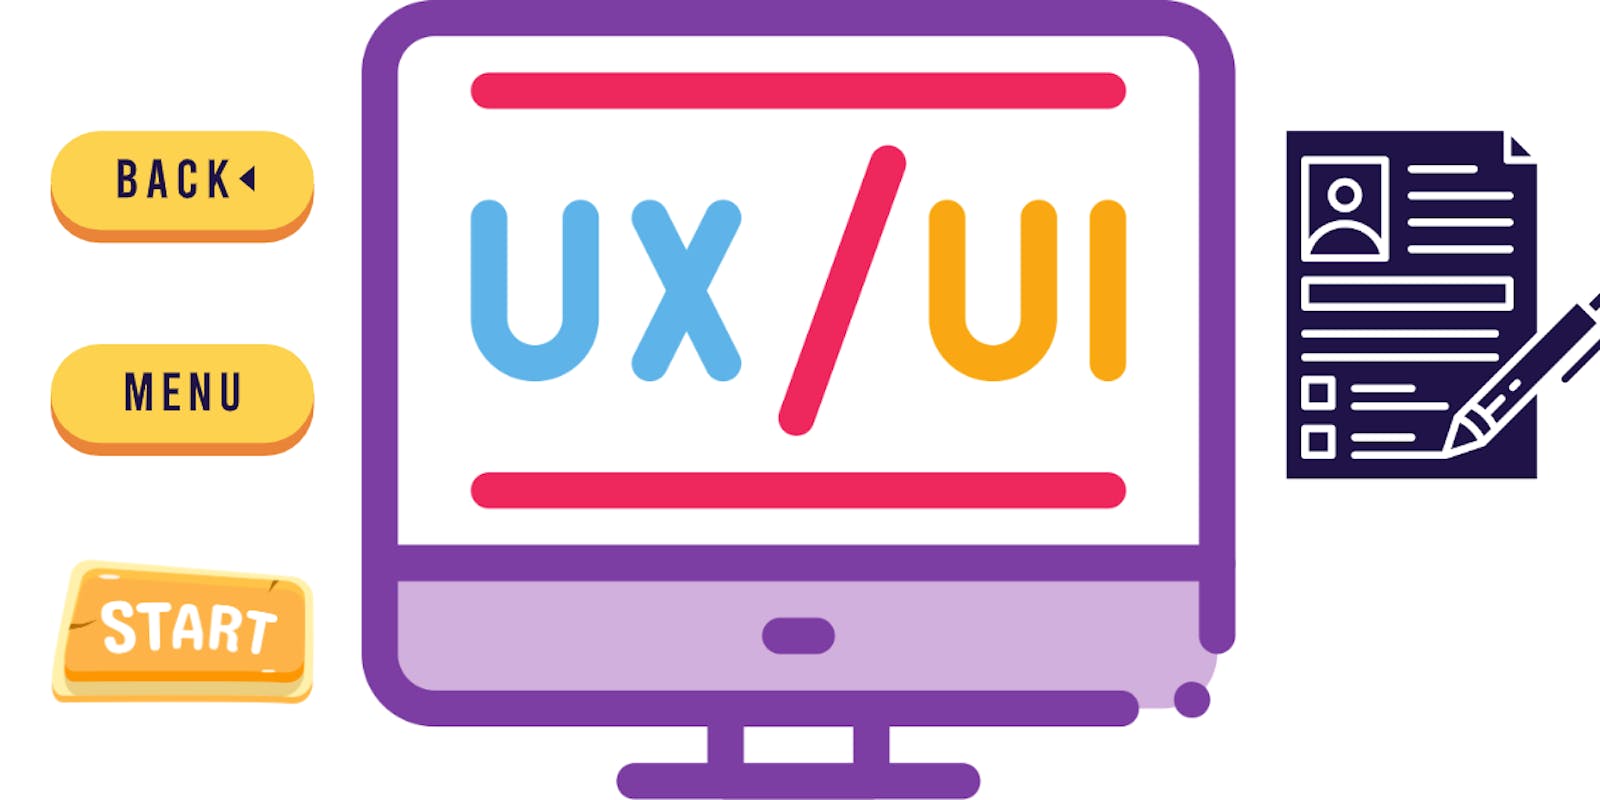 What is UI and UX?